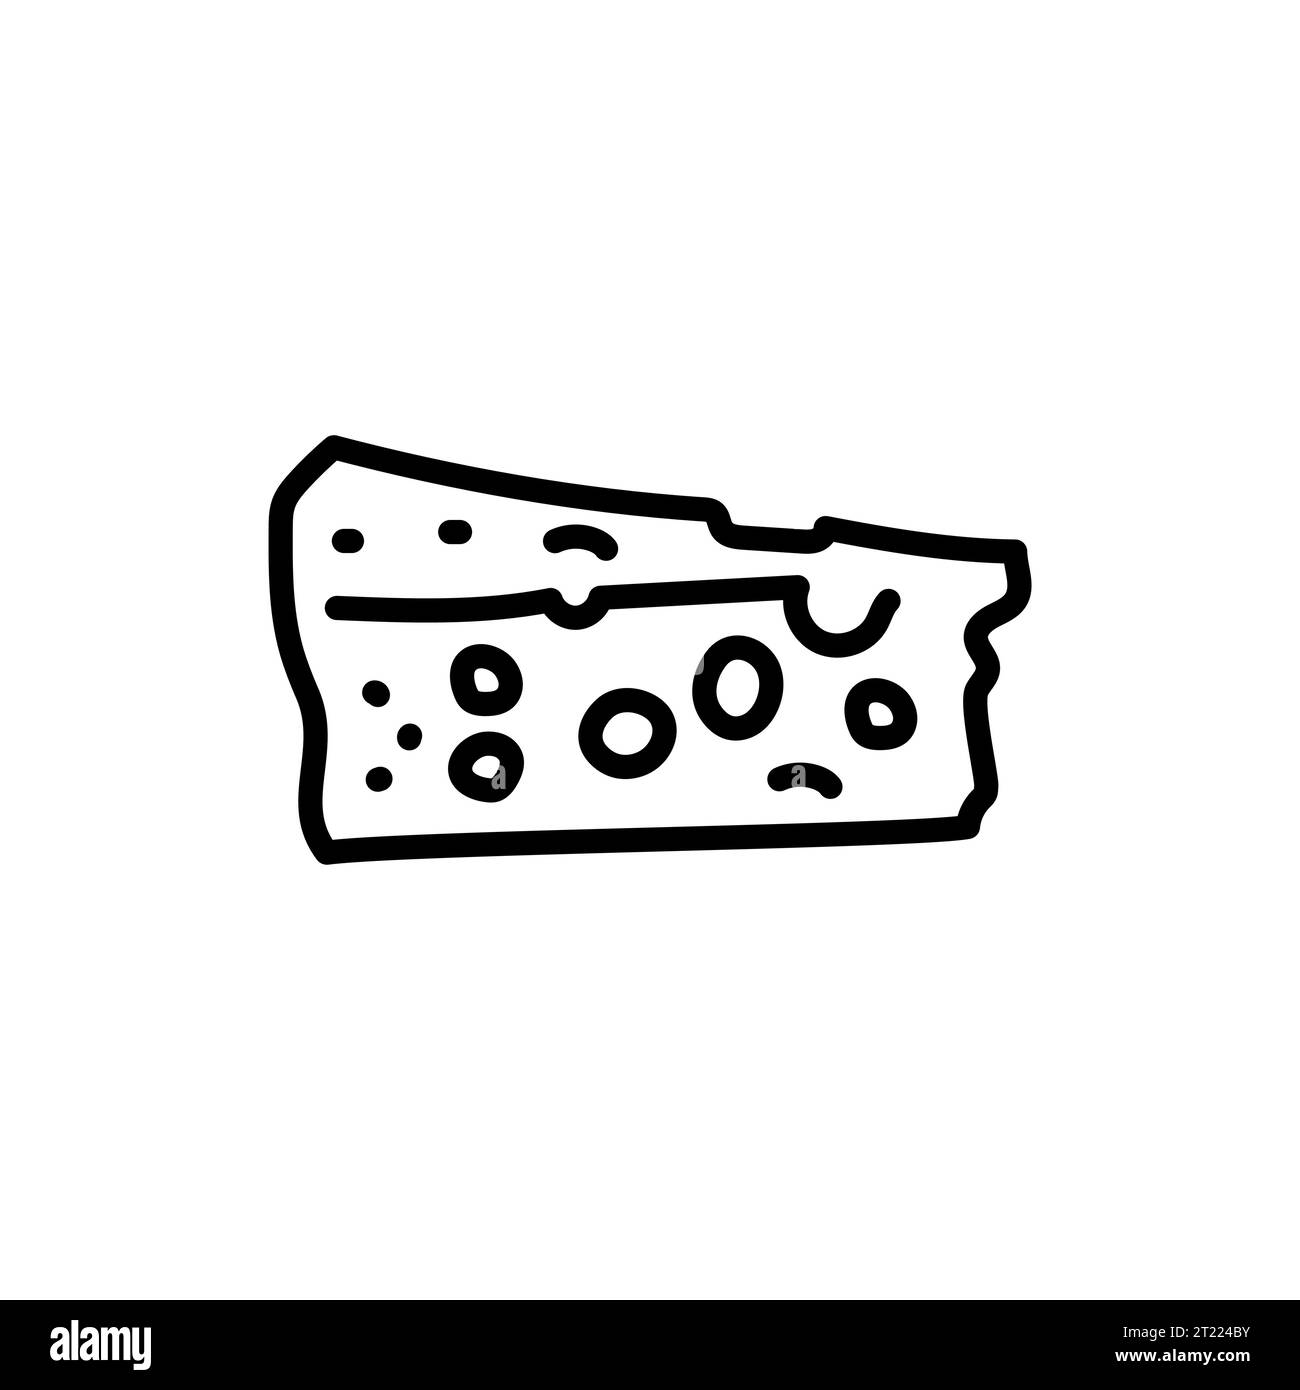 Swiss cheese sign olor line icon. Pictogram for web page. Stock Vector